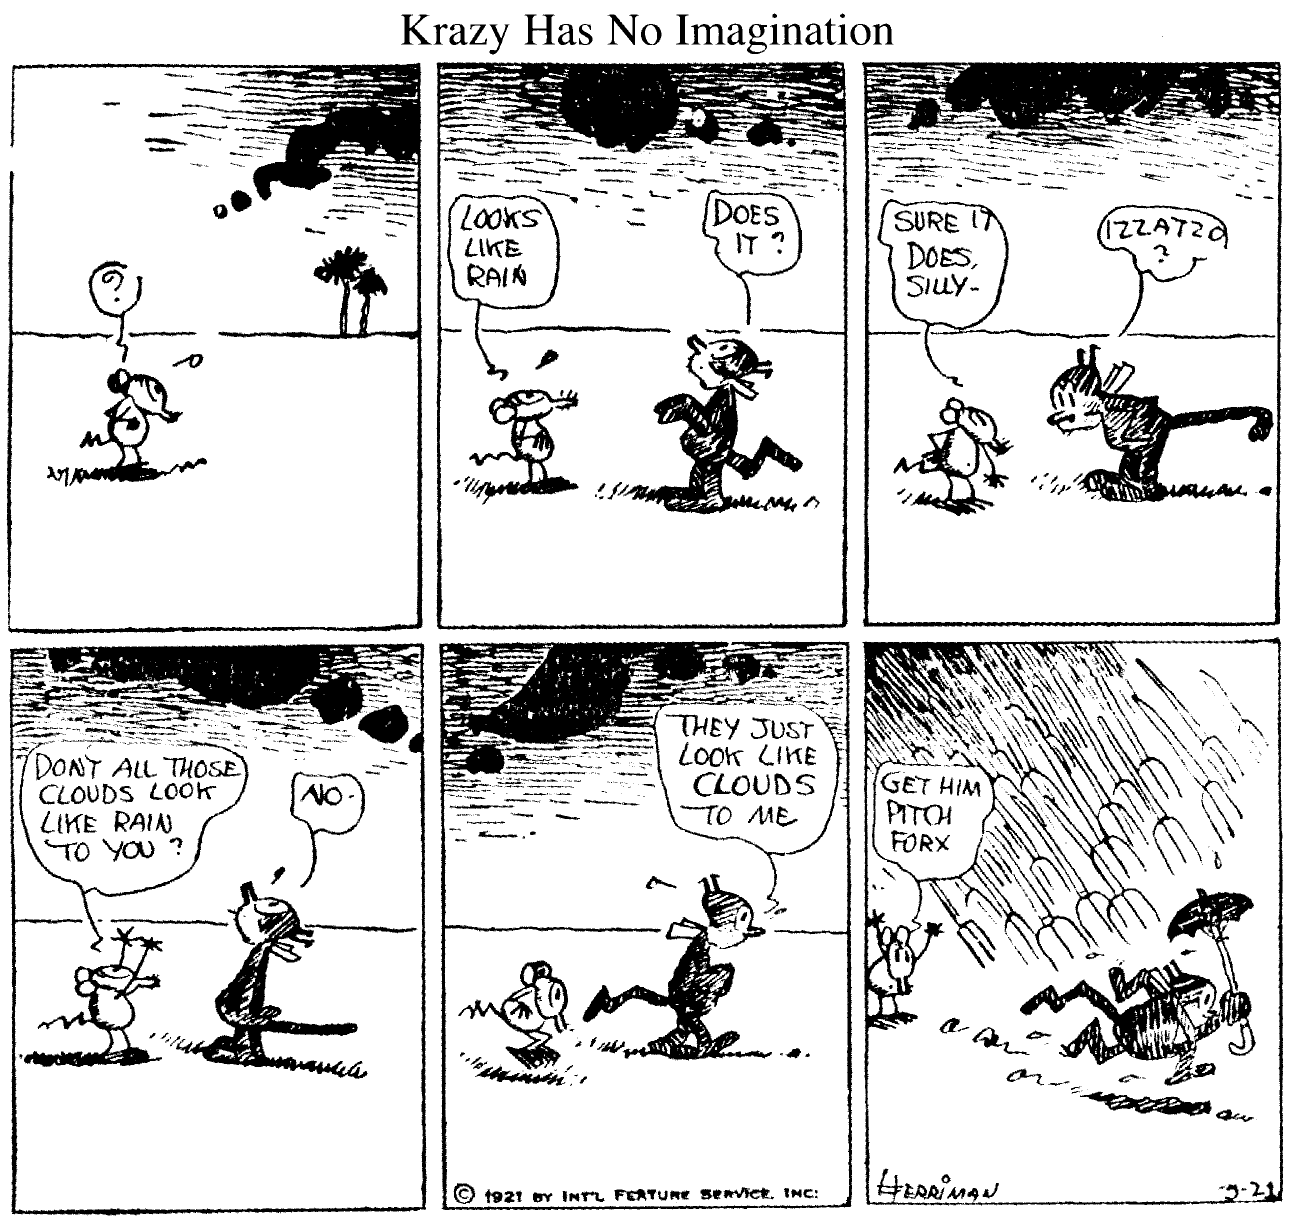 Krazy Kat comic strip: 1. ? sees clouds. 2. Looks like rain. Does it? 3. Sure it does silly. Izzatso? 4. Don;t all those clouds look like rain to you? No. 5. They just look like clouds to me. 6. (Rain comes down with images of pitchforks) Get him pitch forx.